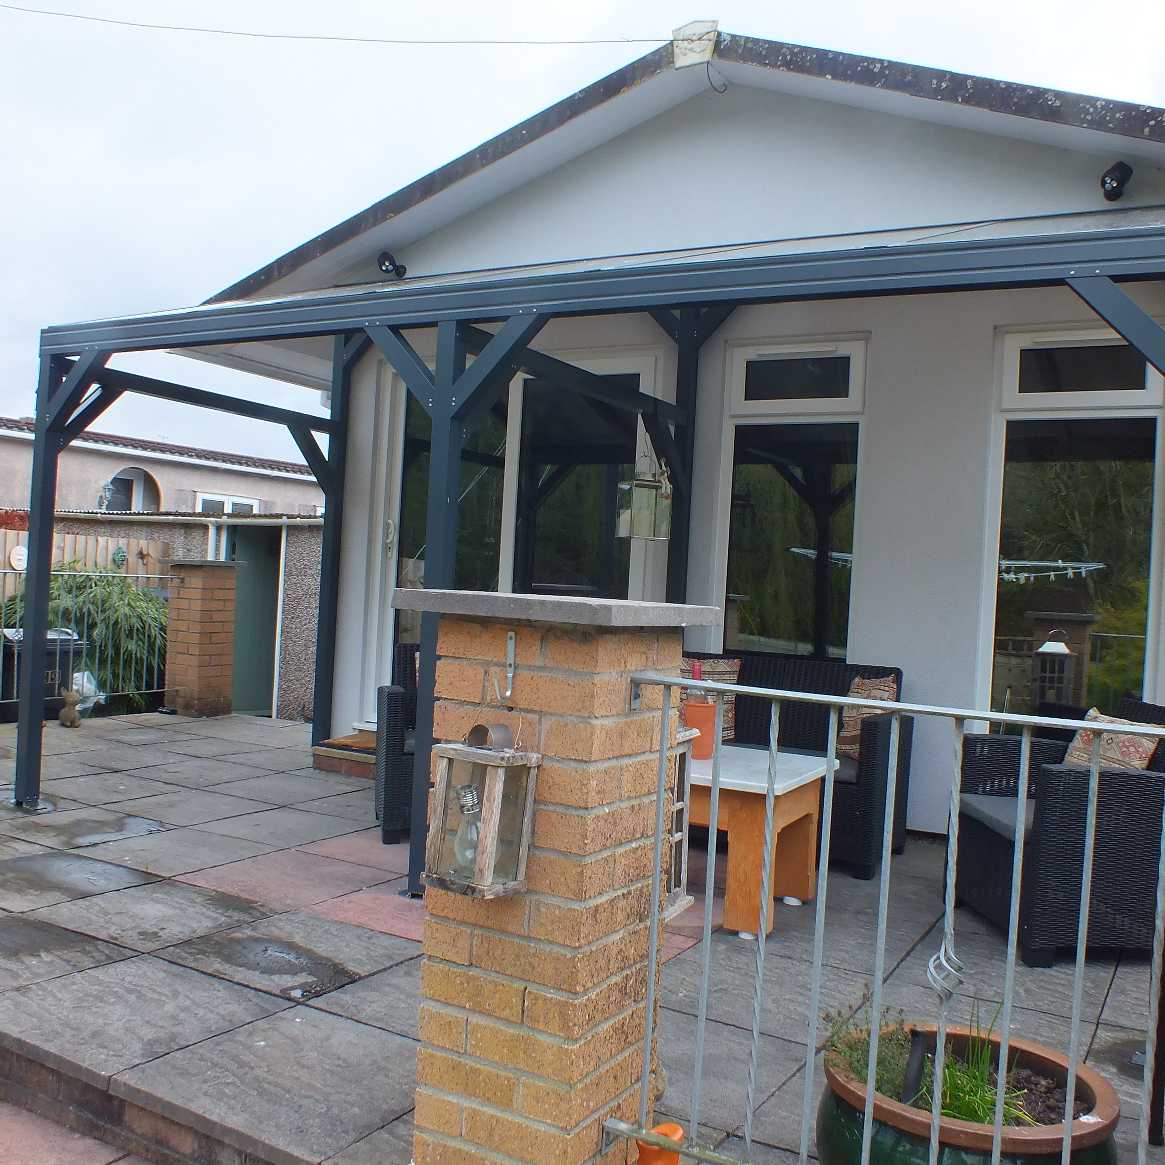 Buy Omega Smart Free-Standing, Anthracite Grey MonoPitch Roof Canopy with 16mm Polycarbonate Glazing - 3.1m (W) x 2.5m (P), (4) Supporting Posts online today